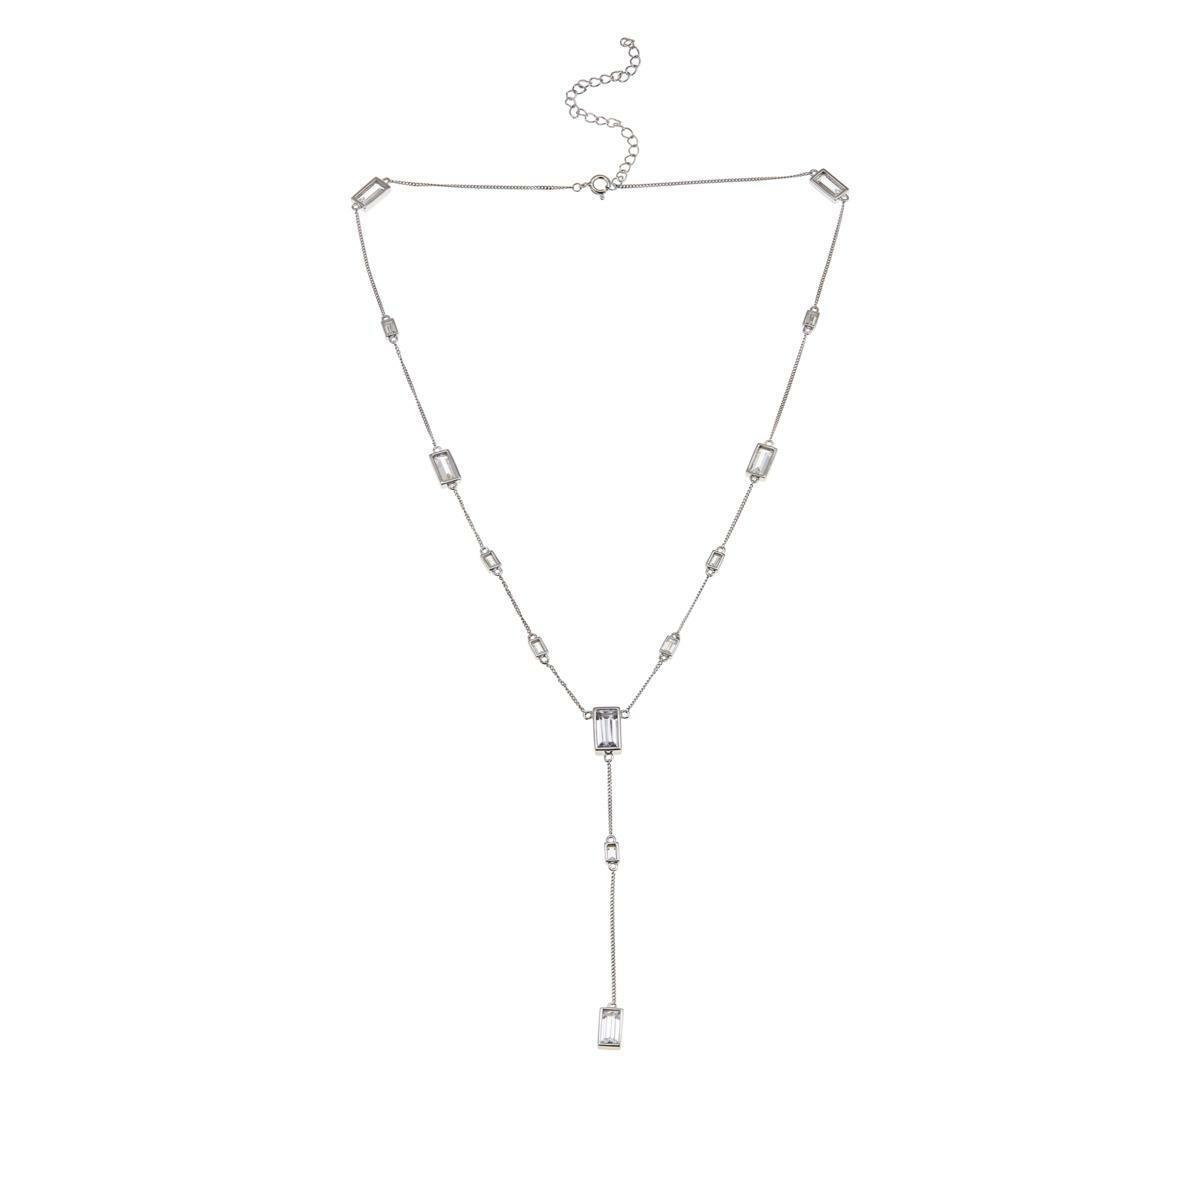 Absolute Sterling Silver 5.2cttw Cubic Zirconia Baguette Station Y Necklace, 18"